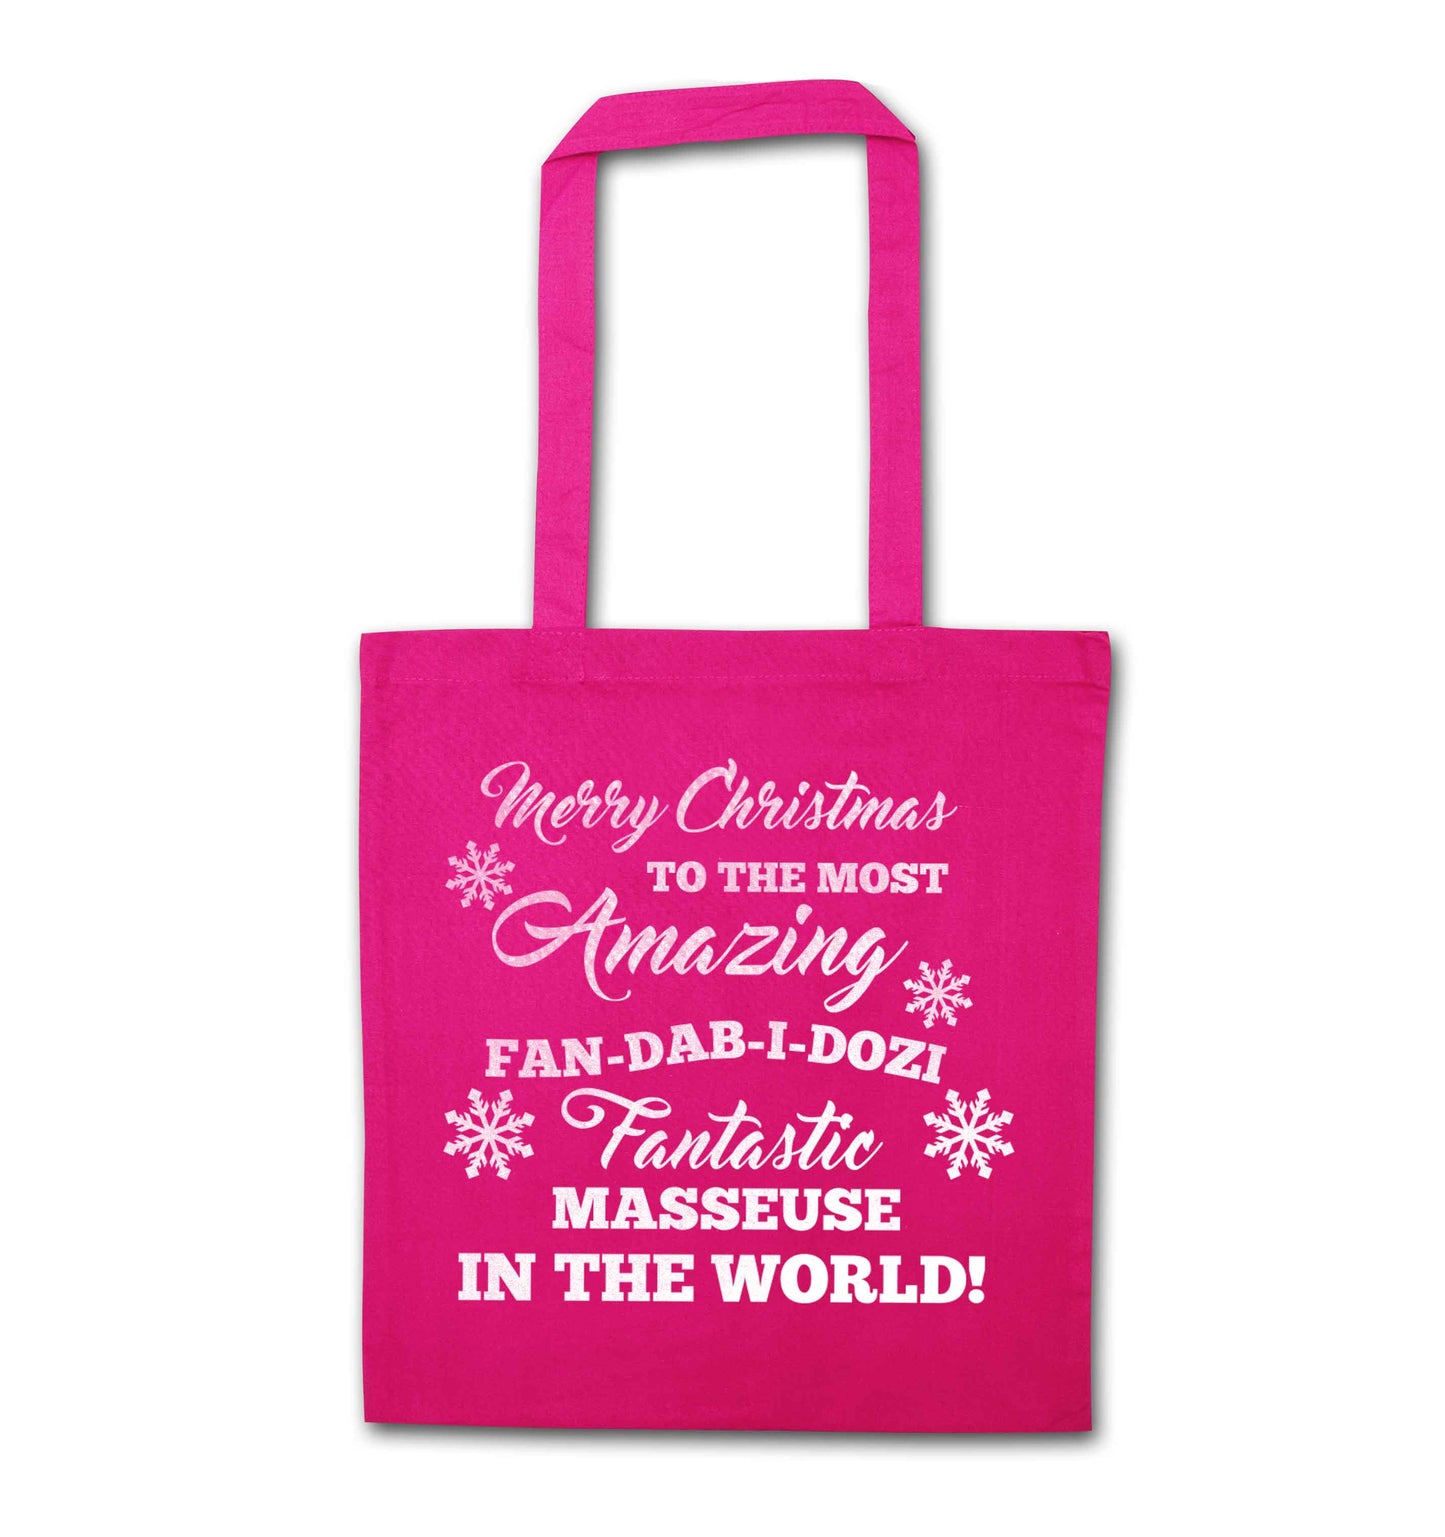 Merry Christmas to the most amazing fan-dab-i-dozi fantasic masseuse in the world pink tote bag